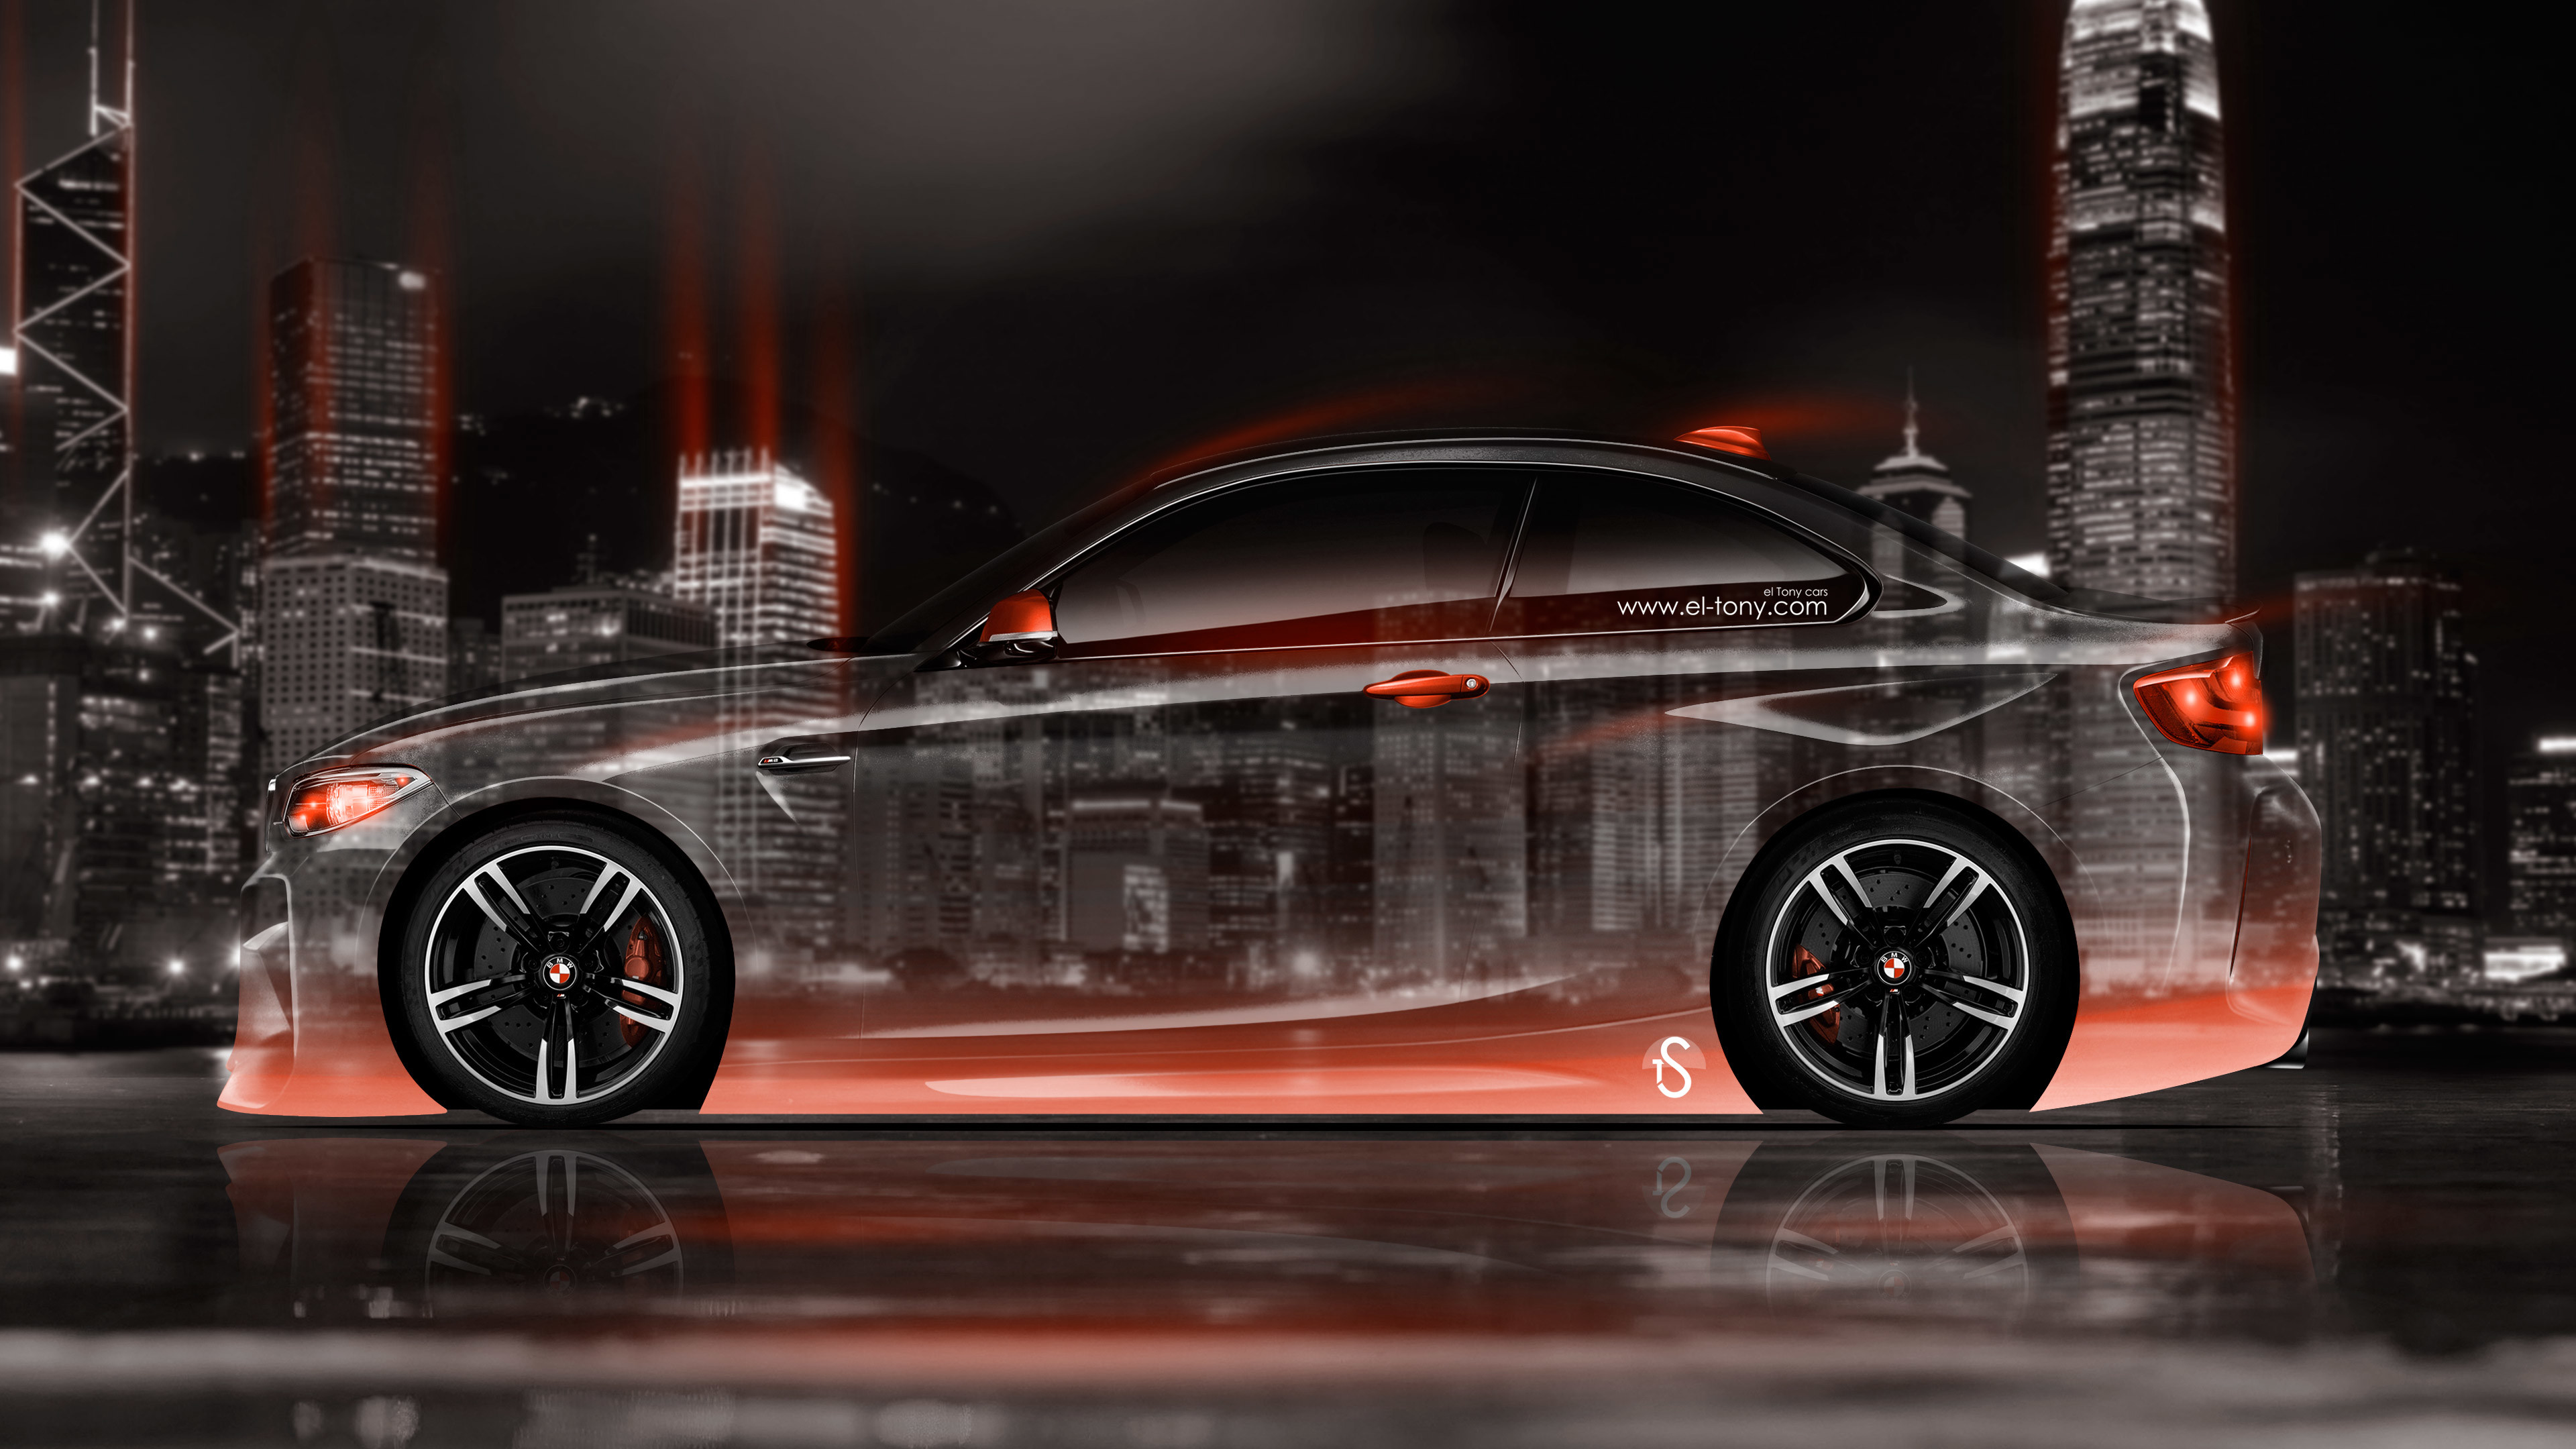 3840x2160 BMW-M2-Coupe-Side-Crystal-City-Night-Car- ...